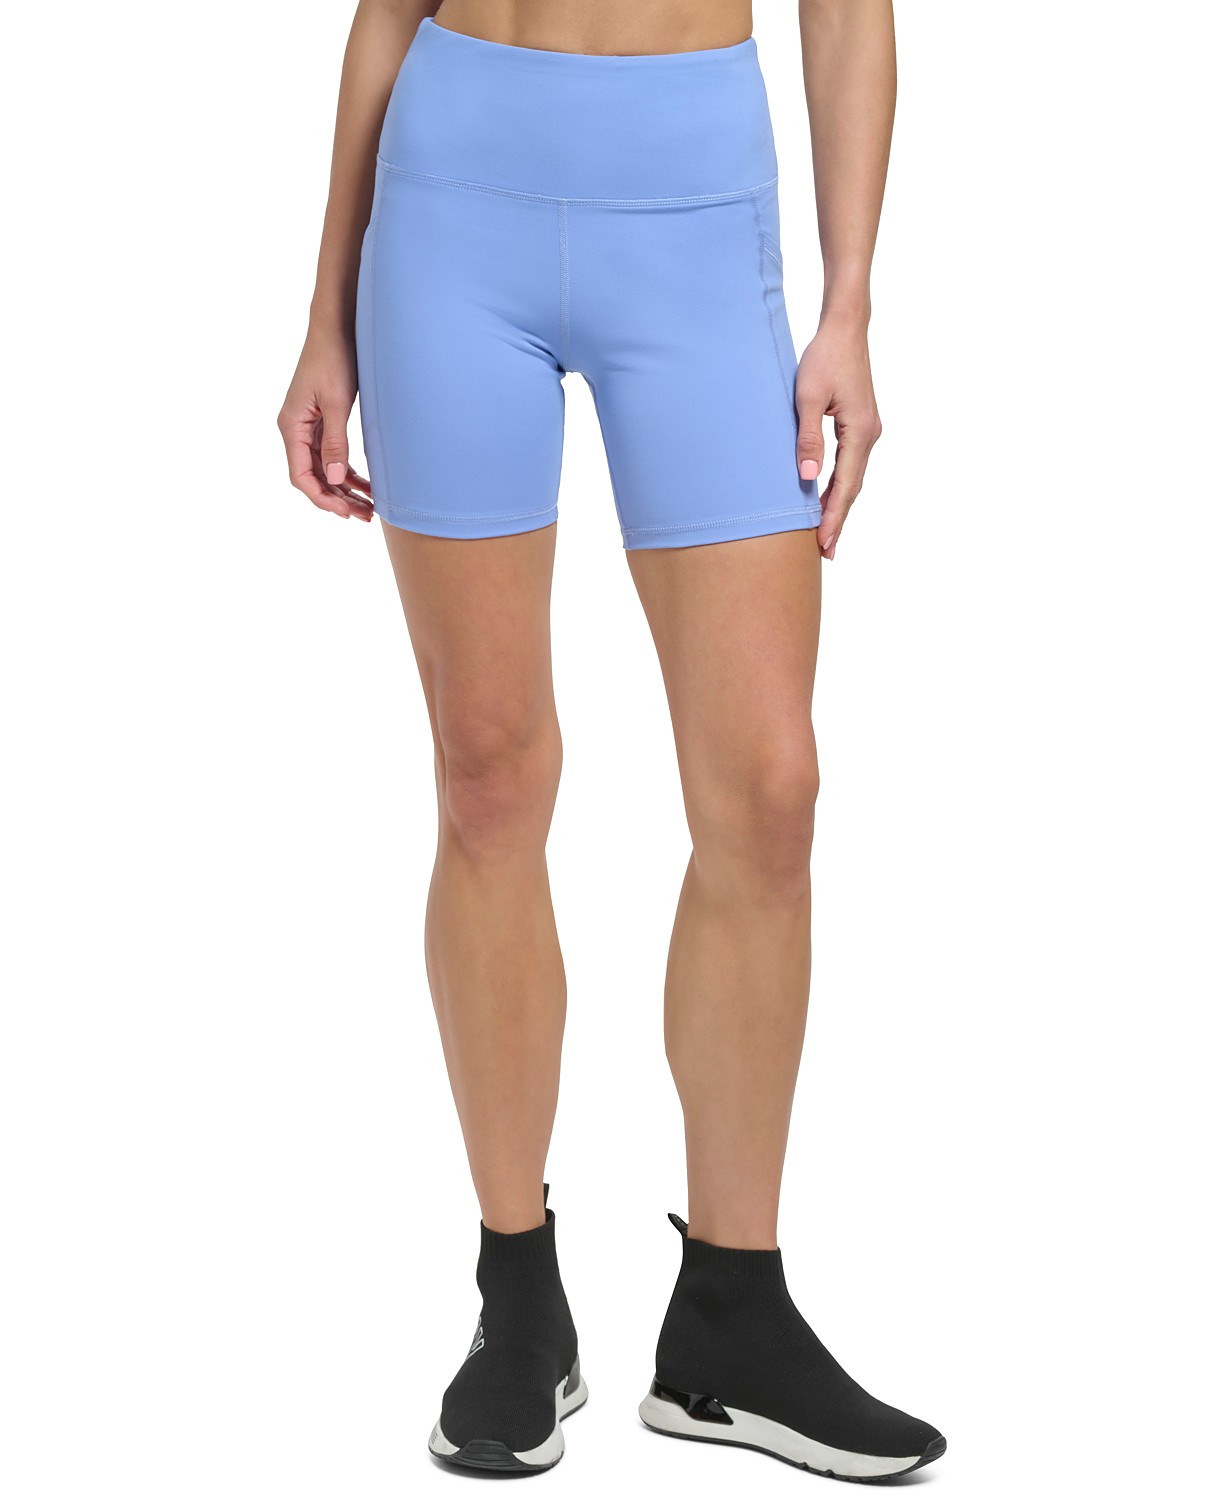 Womens Balance Super High Rise Pull-On Bicycle Shorts